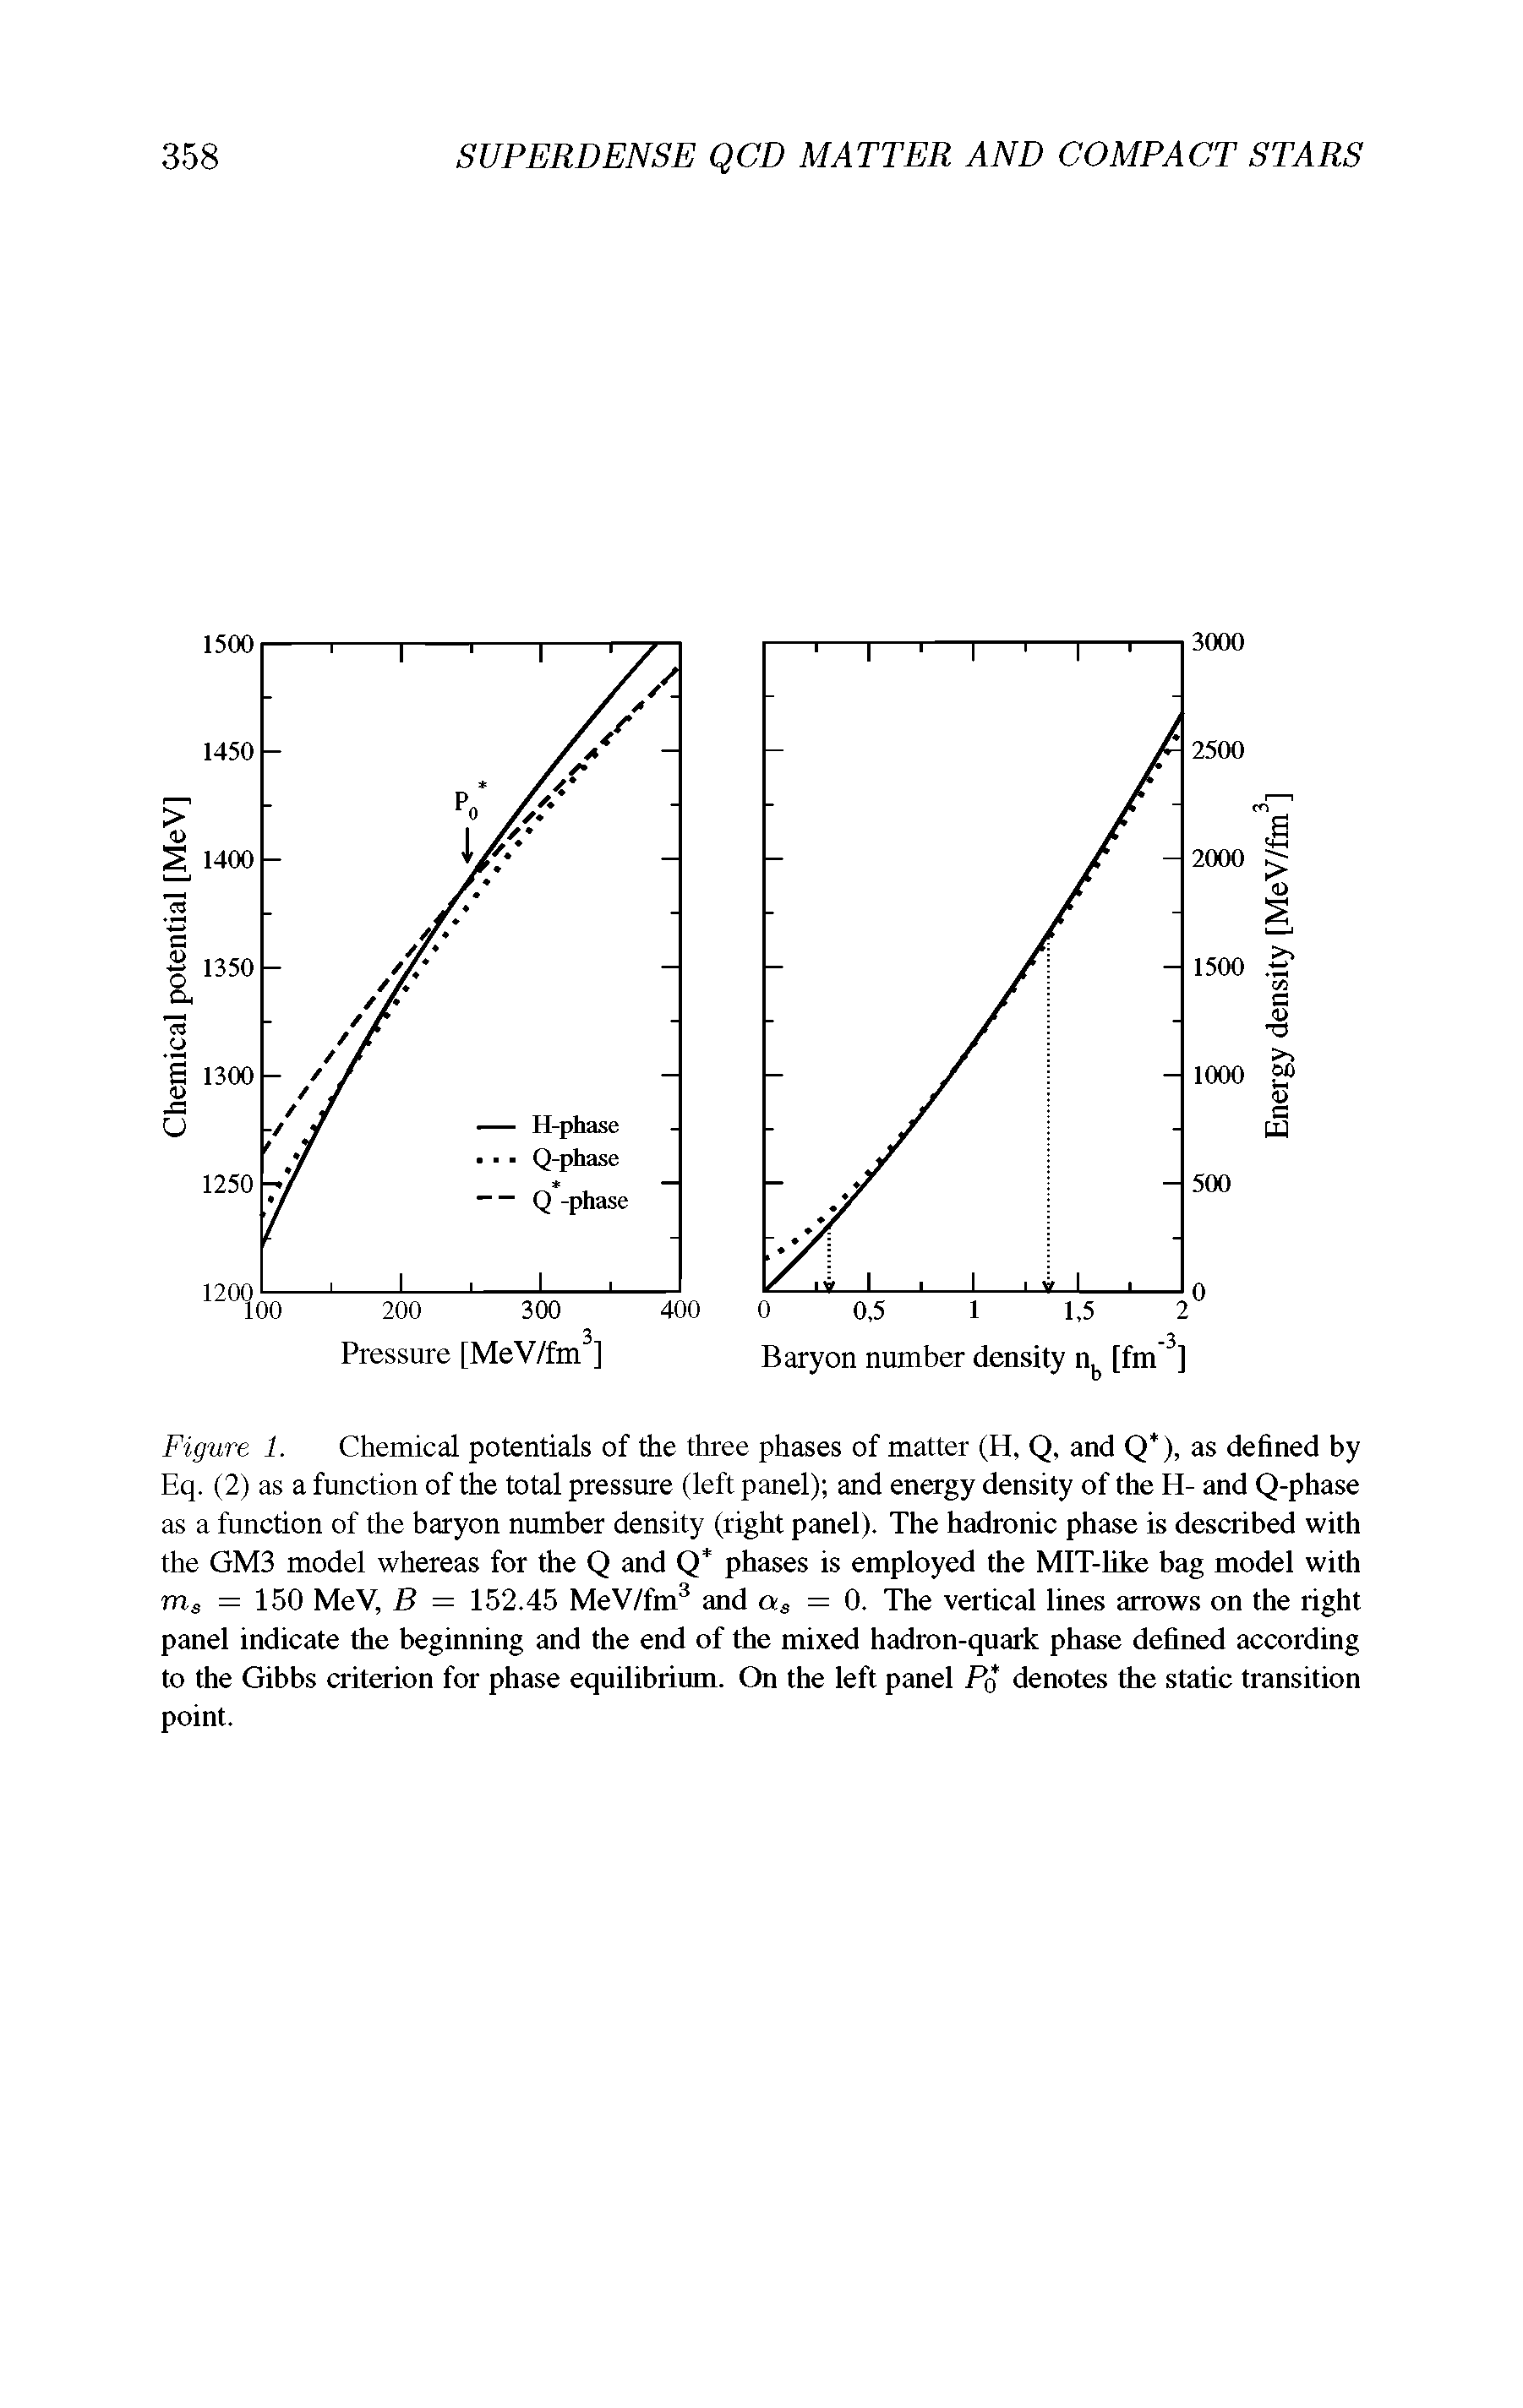 Figure 1. Chemical potentials of the three phases of matter (H, Q, and Q ), as defined by Eq. (2) as a function of the total pressure (left panel) and energy density of the H- and Q-phase as a function of the baryon number density (right panel). The hadronic phase is described with the GM3 model whereas for the Q and Q phases is employed the MIT-like bag model with ms = 150 MeV, B = 152.45 MeV/fm3 and as = 0. The vertical lines arrows on the right panel indicate the beginning and the end of the mixed hadron-quark phase defined according to the Gibbs criterion for phase equilibrium. On the left panel P0 denotes the static transition point.